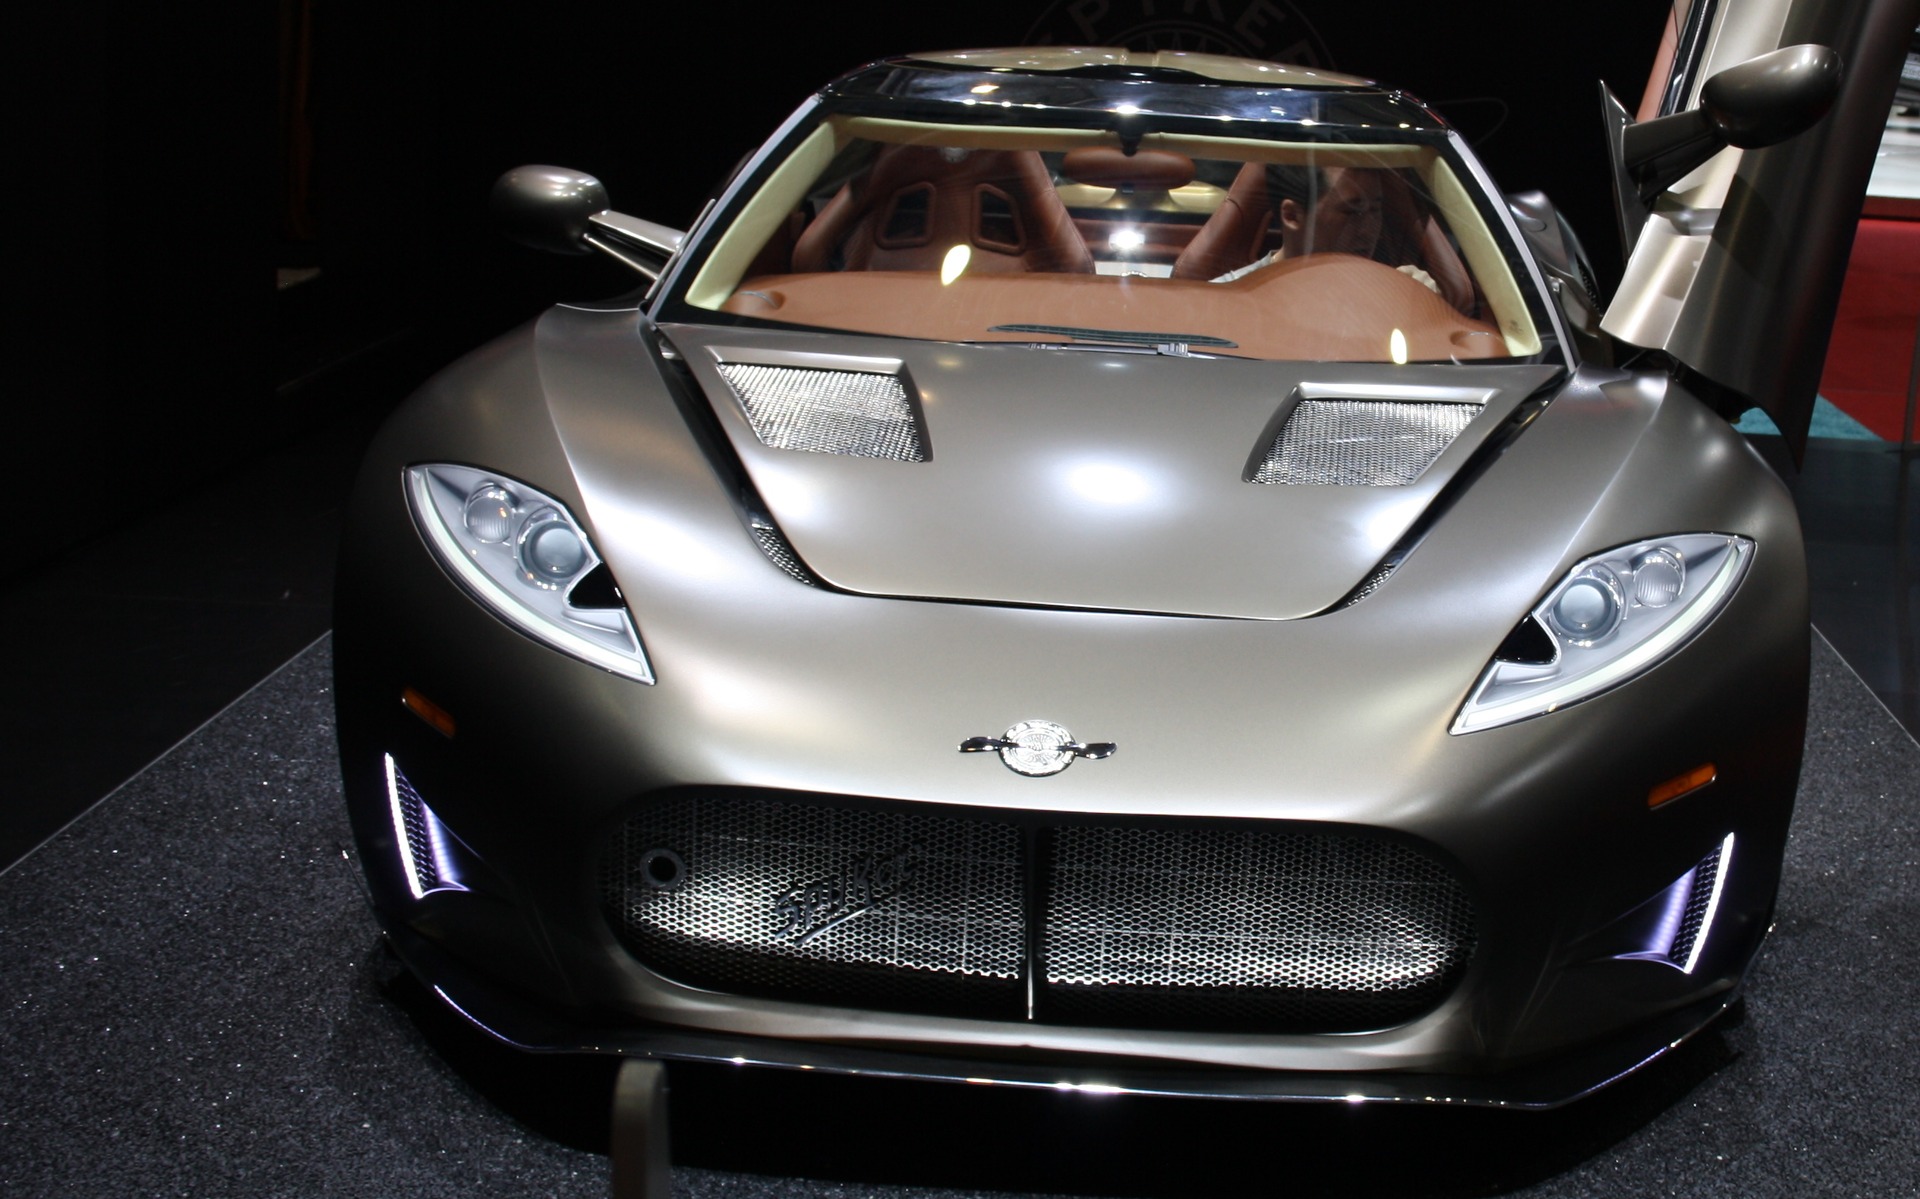 Spyker C8 Preliator: Expensive and Unconventional, Yet so Endearing - 2/3